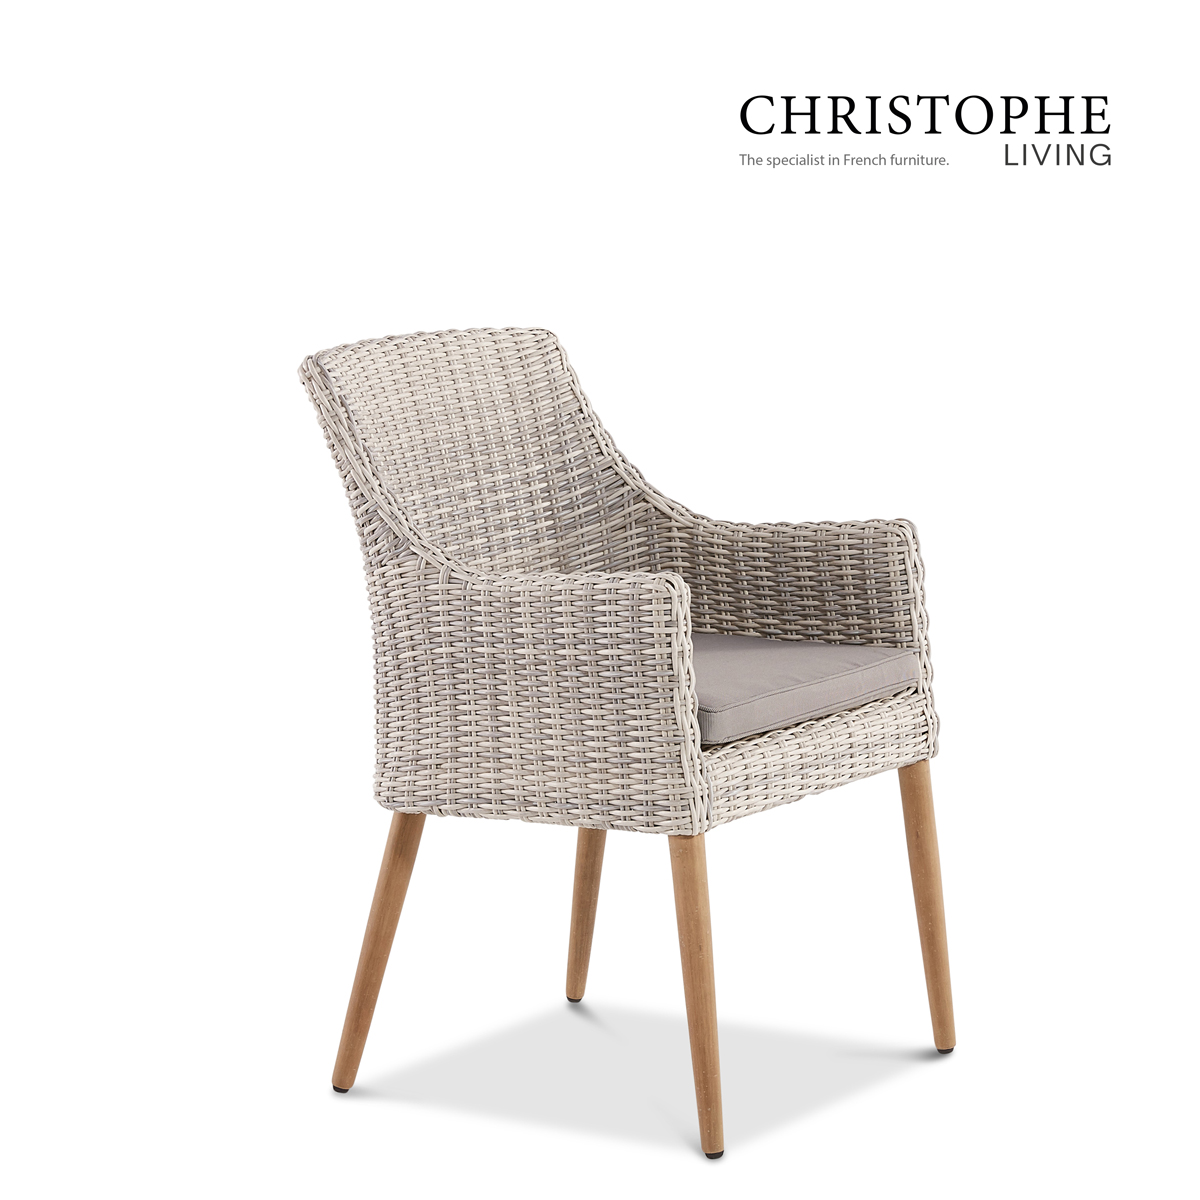 Hamilton Elegance Outdoor Dining Chair in White/Grey Synthetic Rattan and Wicker